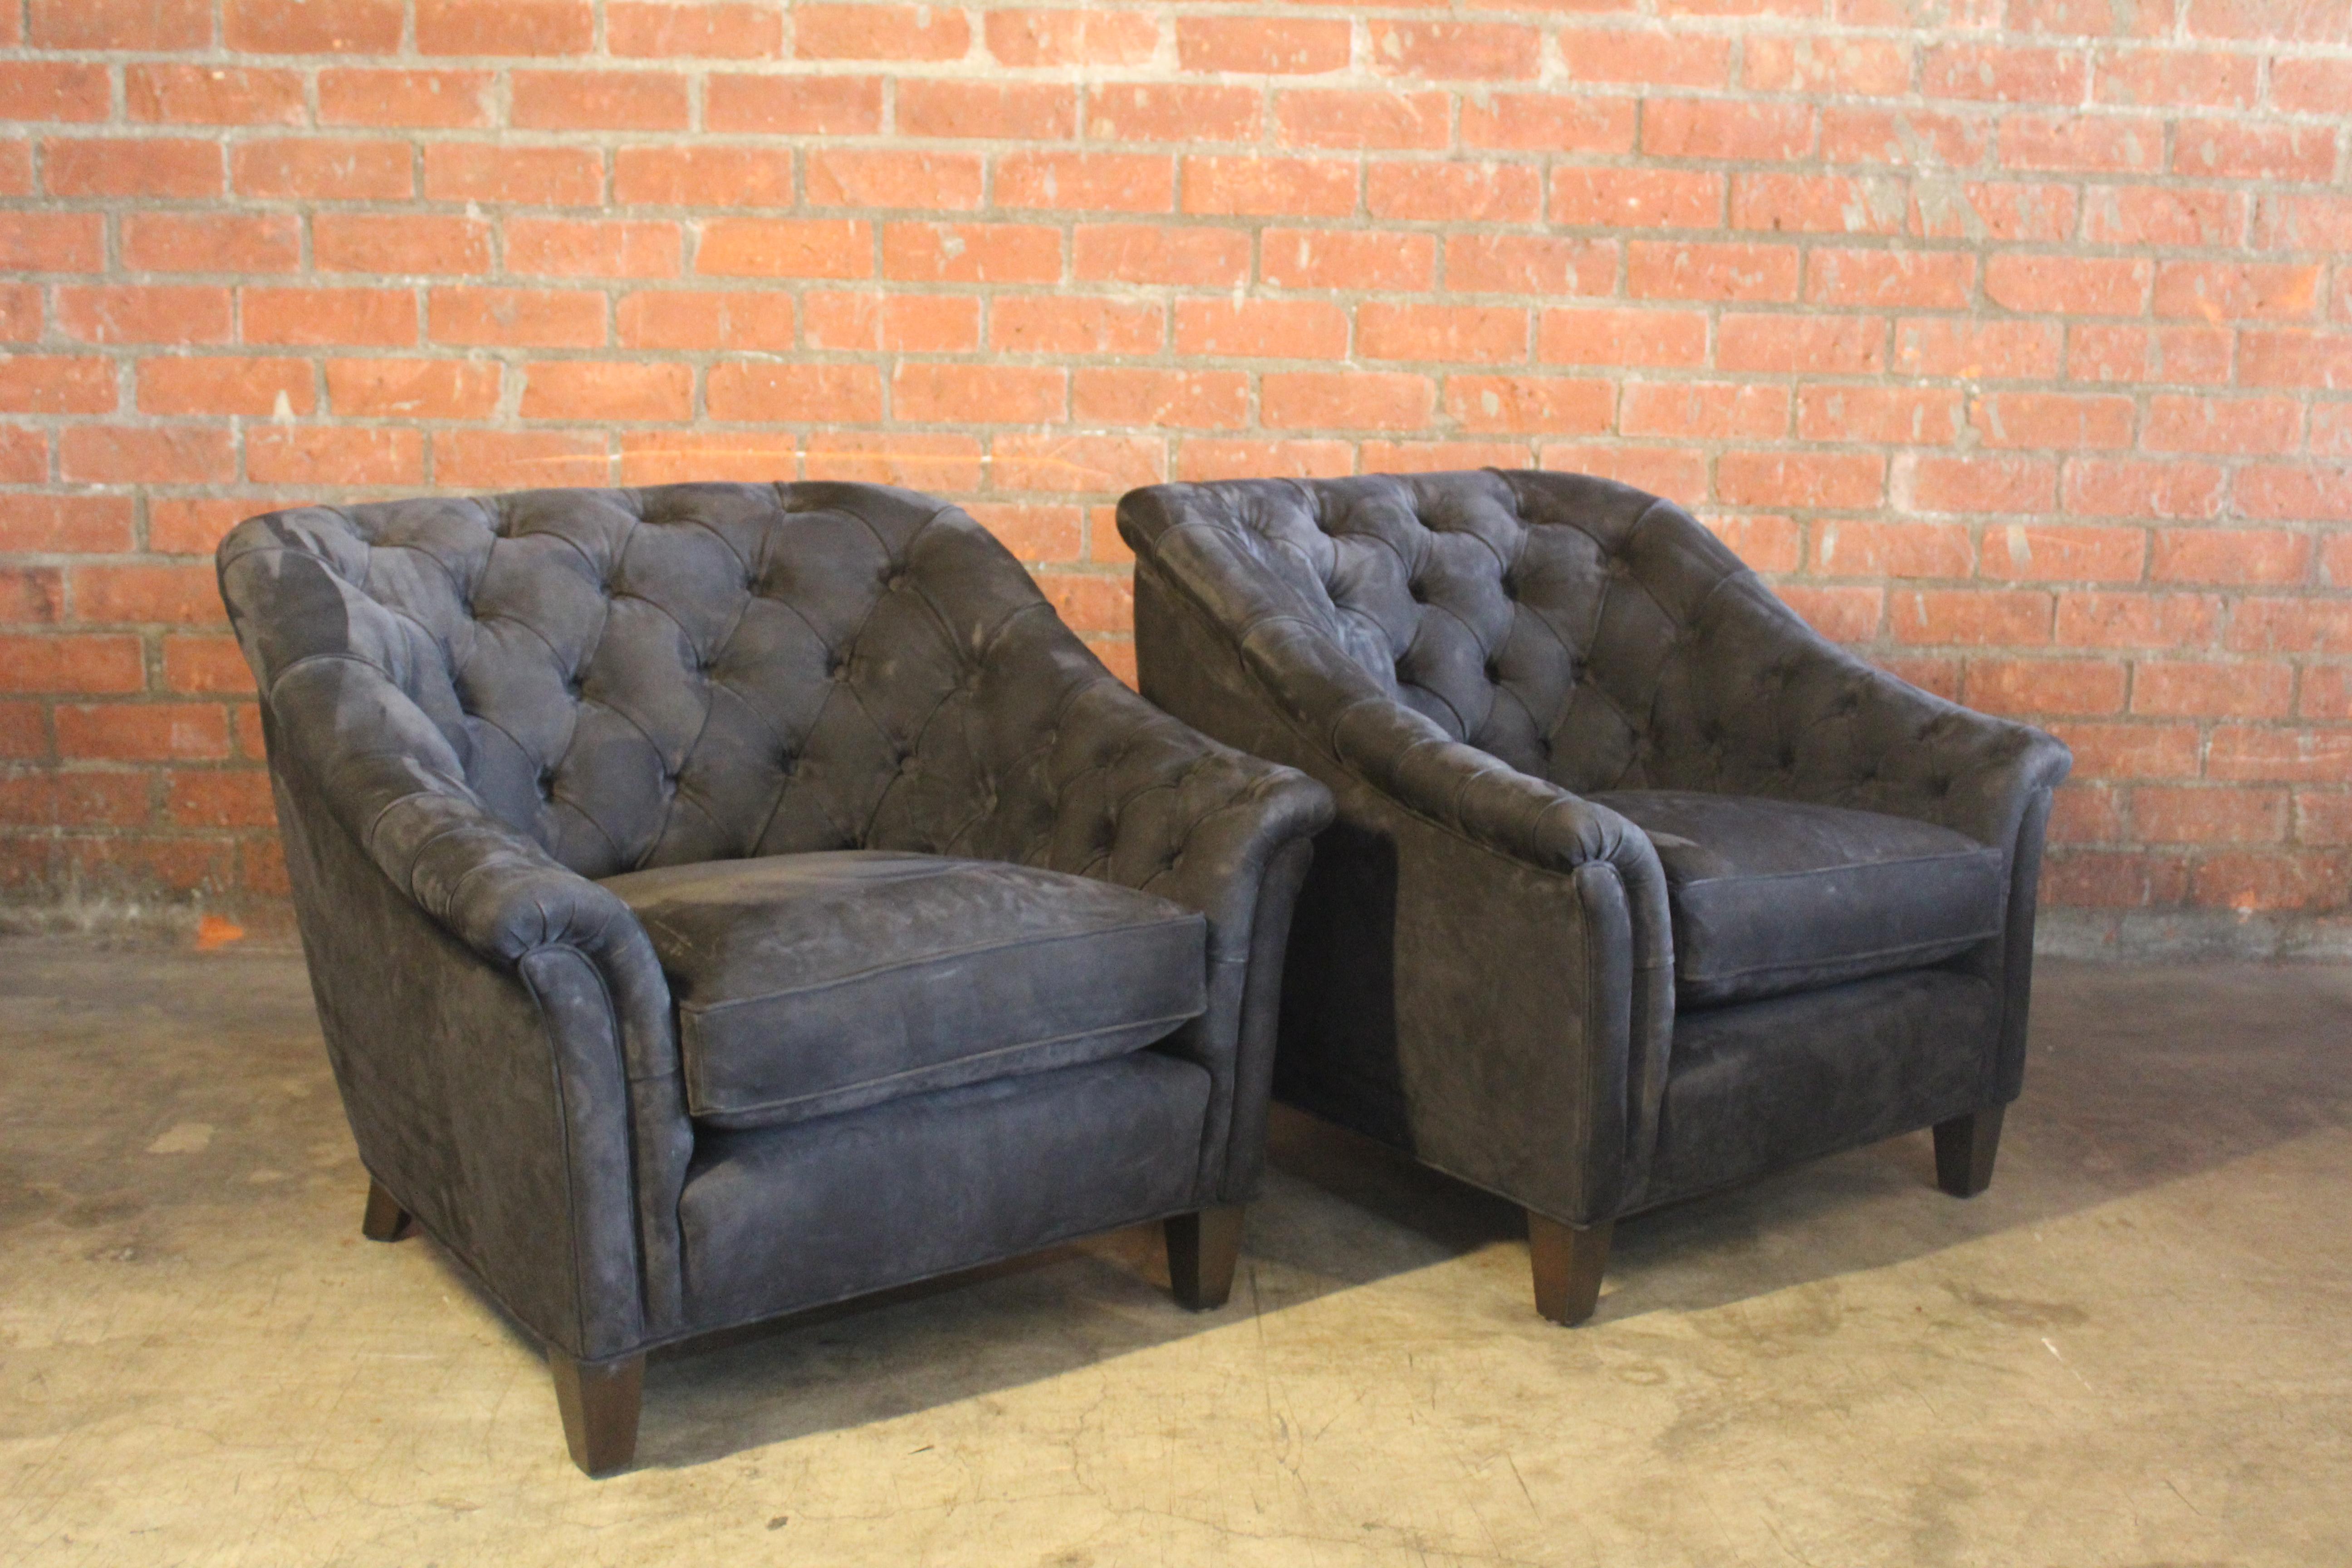 Pair of Tufted Leather Club Chairs, France, 1960s For Sale 3